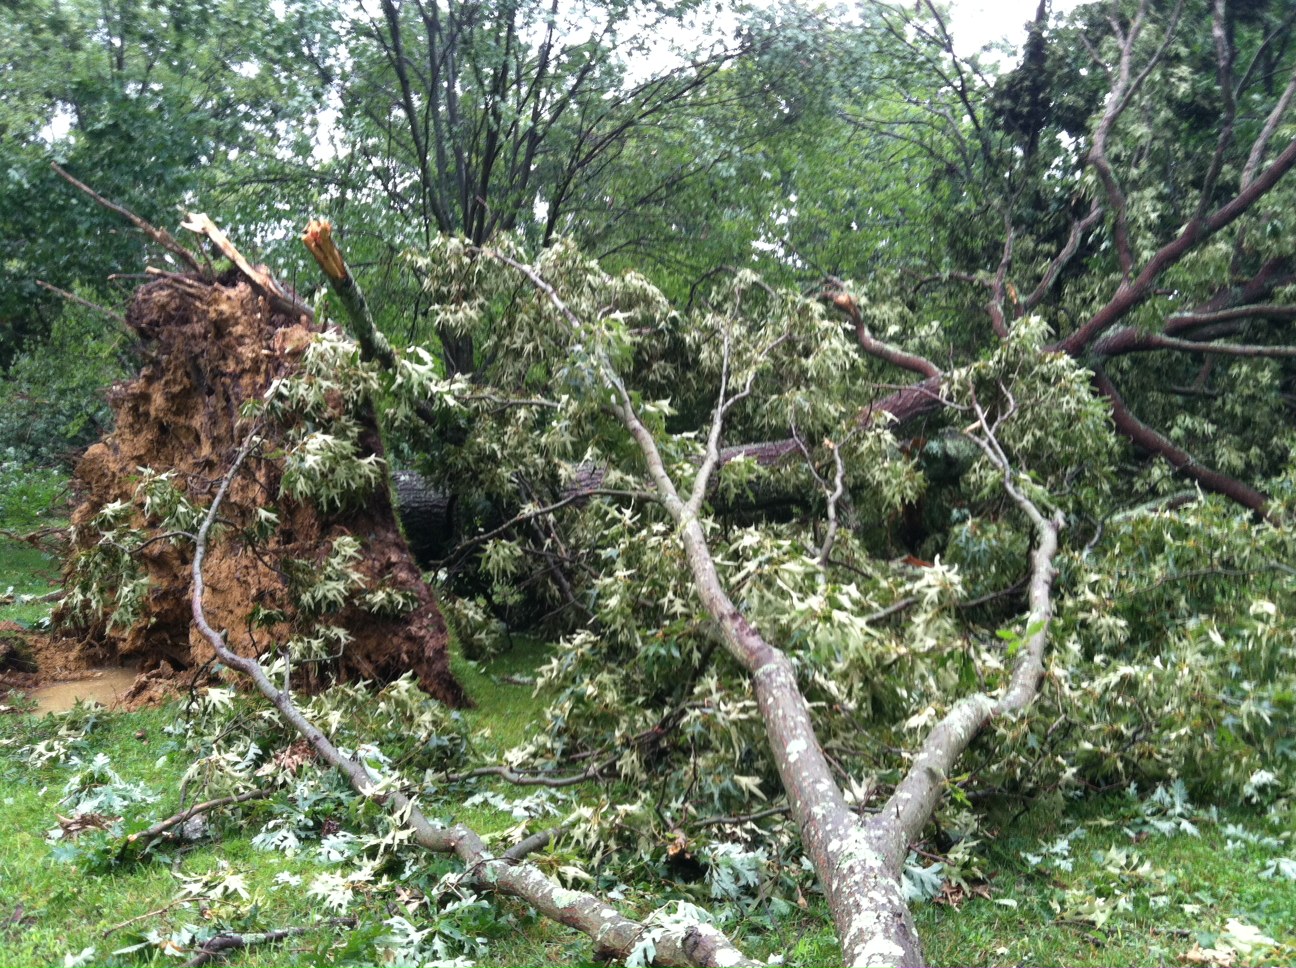 The tornado uprooted some trees, and snapped others Saturday afternoon. (WTOP/Dave Dildine)